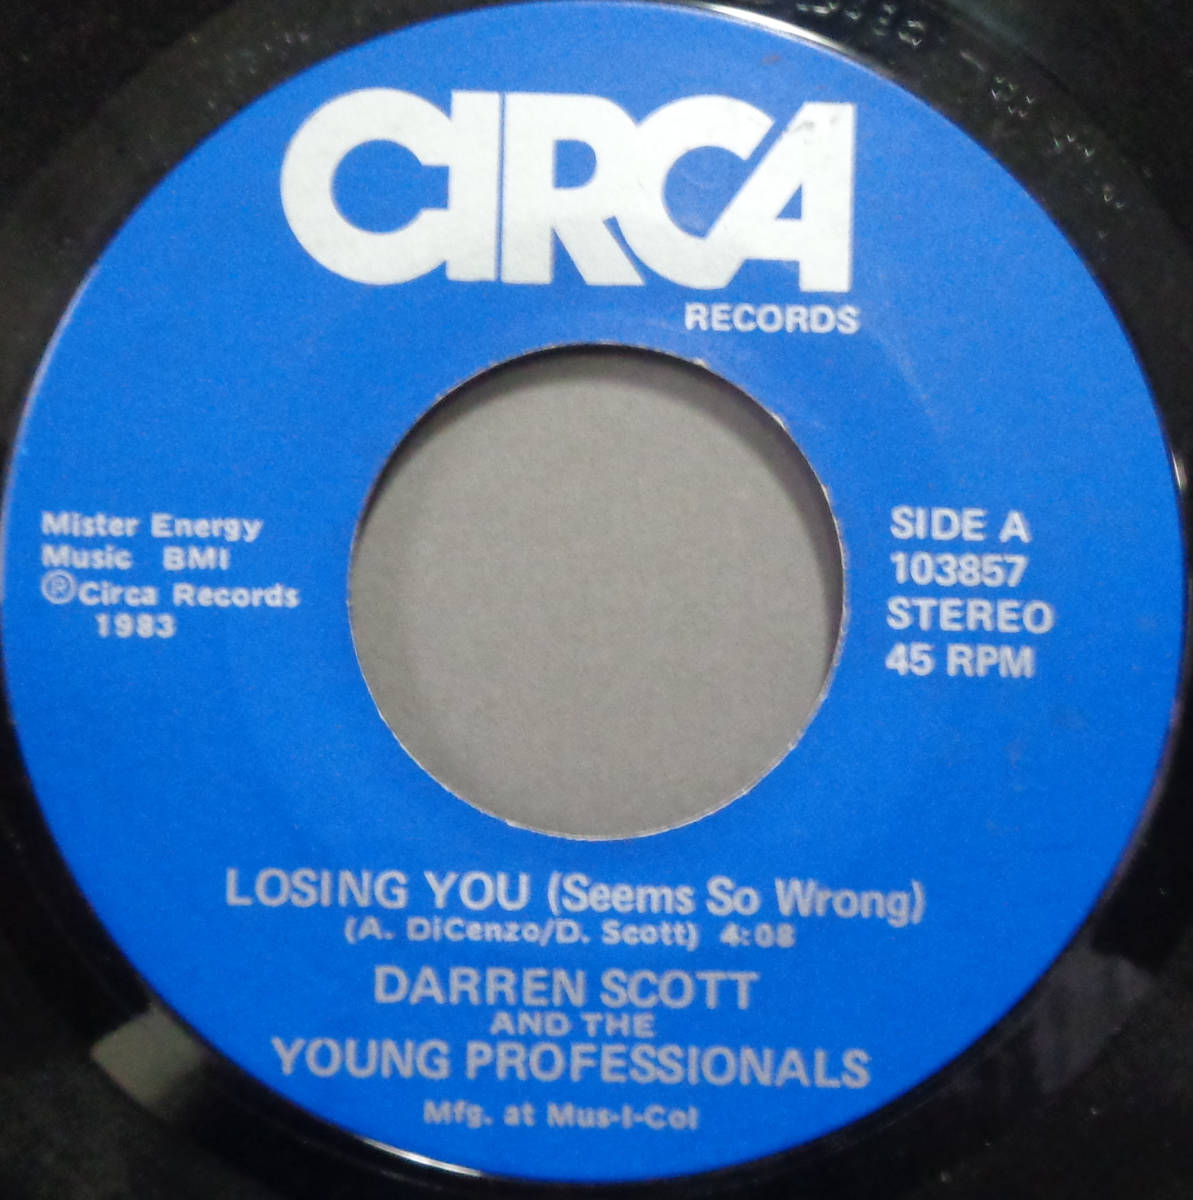 【SOUL 45】DARREN SCOTT & THE YOUNG PROFESSIONALS - LOSING YOU / DANCE IN THE DARK (s231223001)